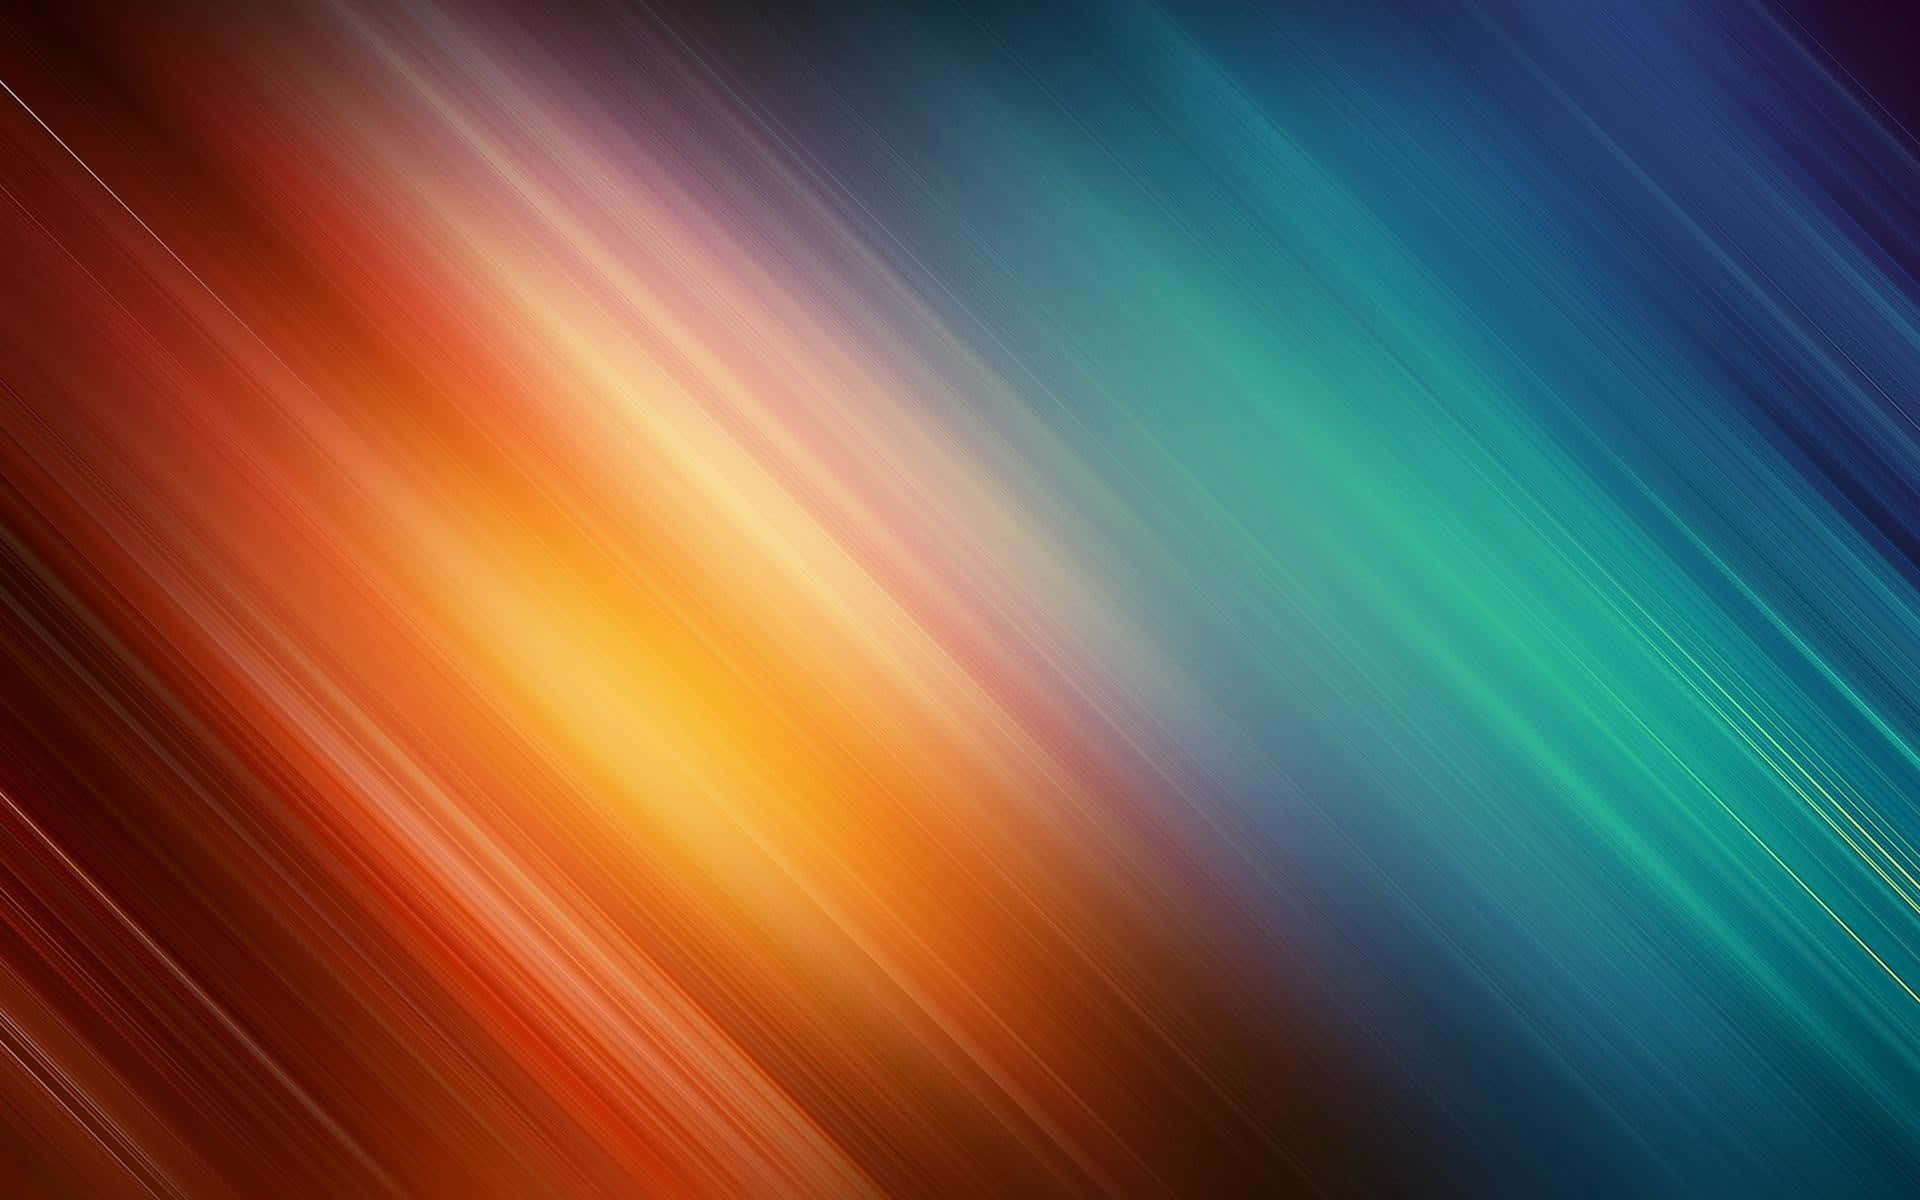 A Colorful Abstract Background With Lines